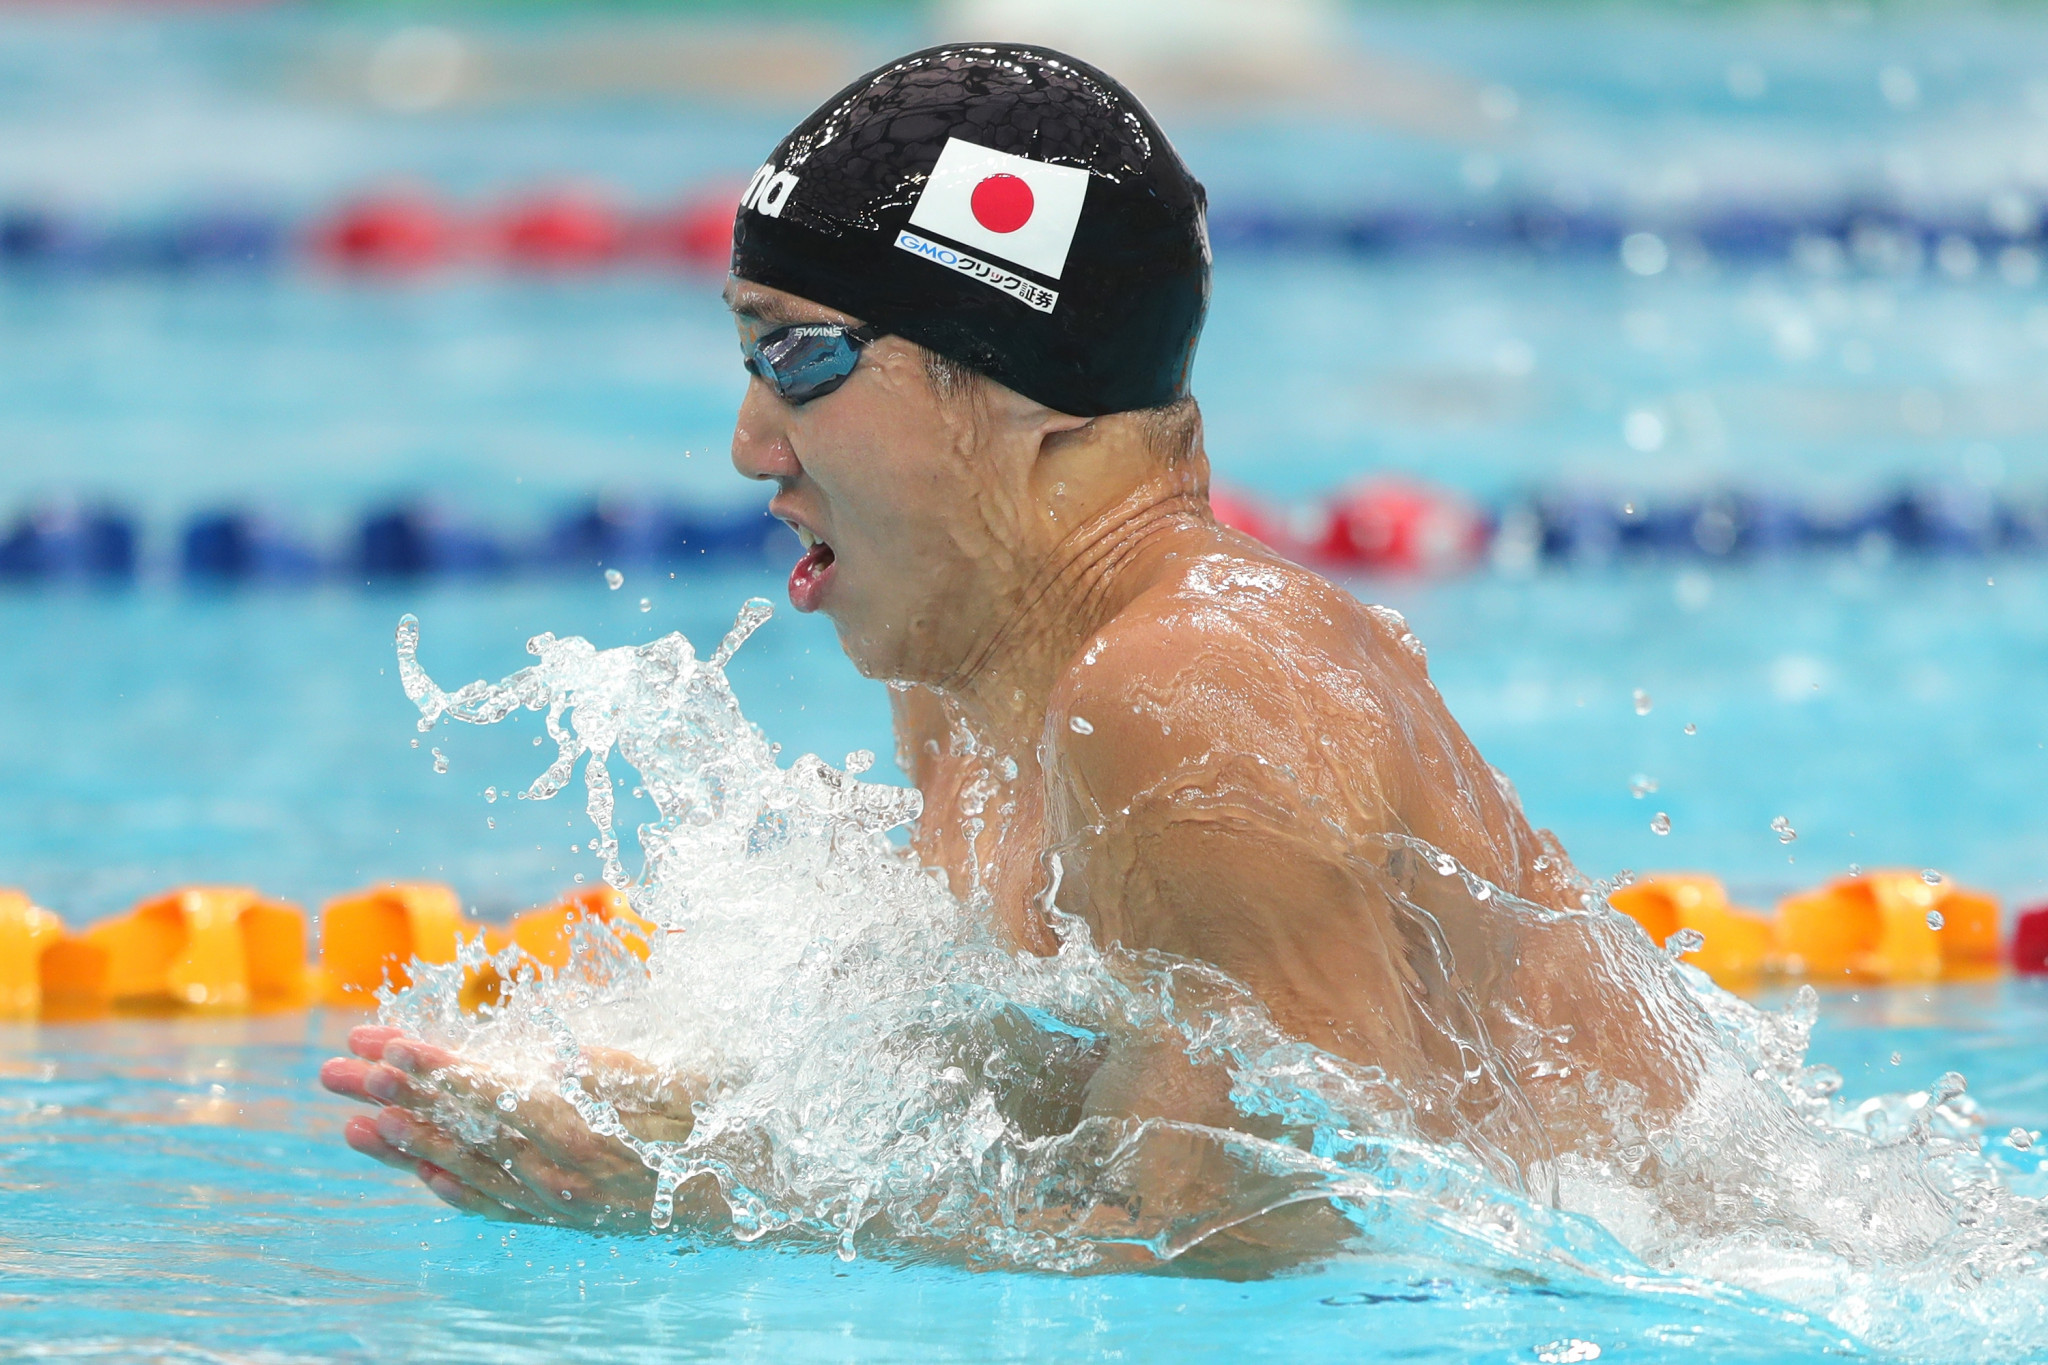 Hiromasa Fujimori won two bronze medals at the World Short Course Championships in December ©Getty Images